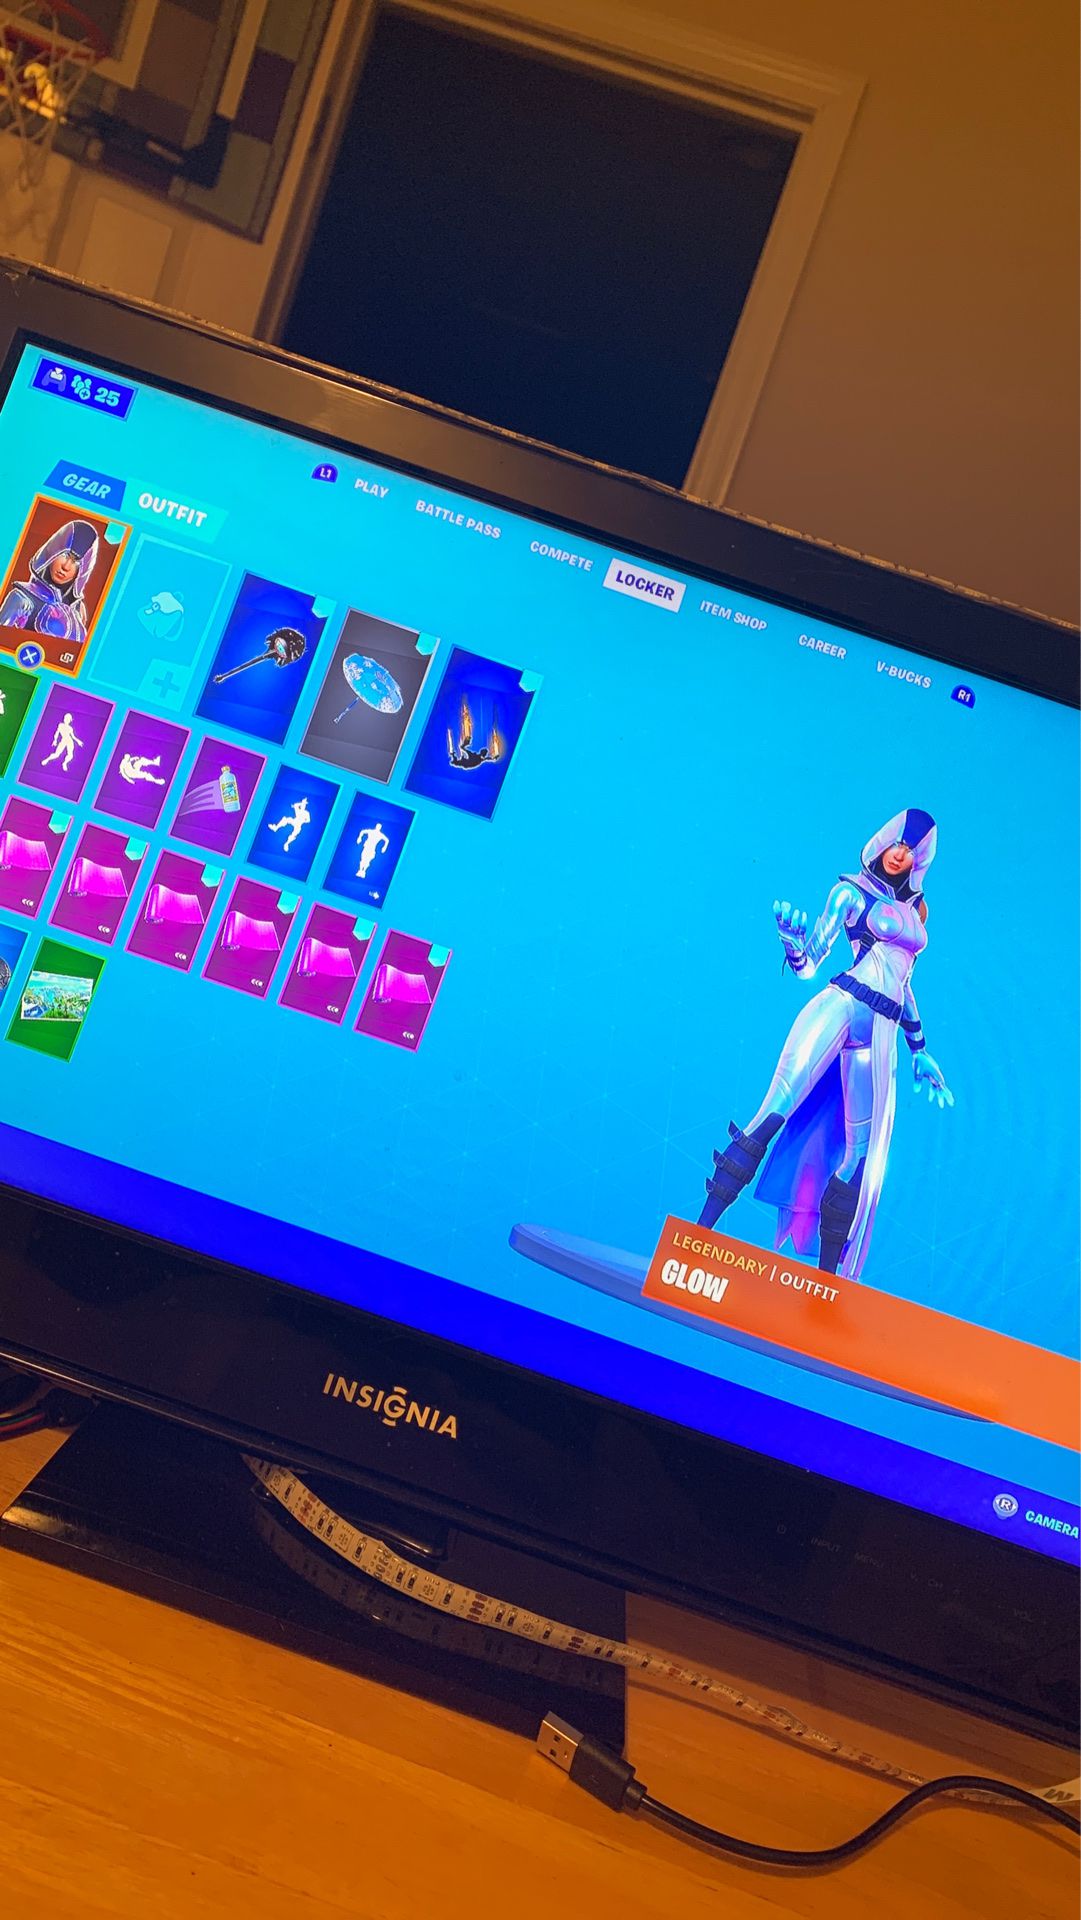 Fortnite acount with 500 dollars worth of items